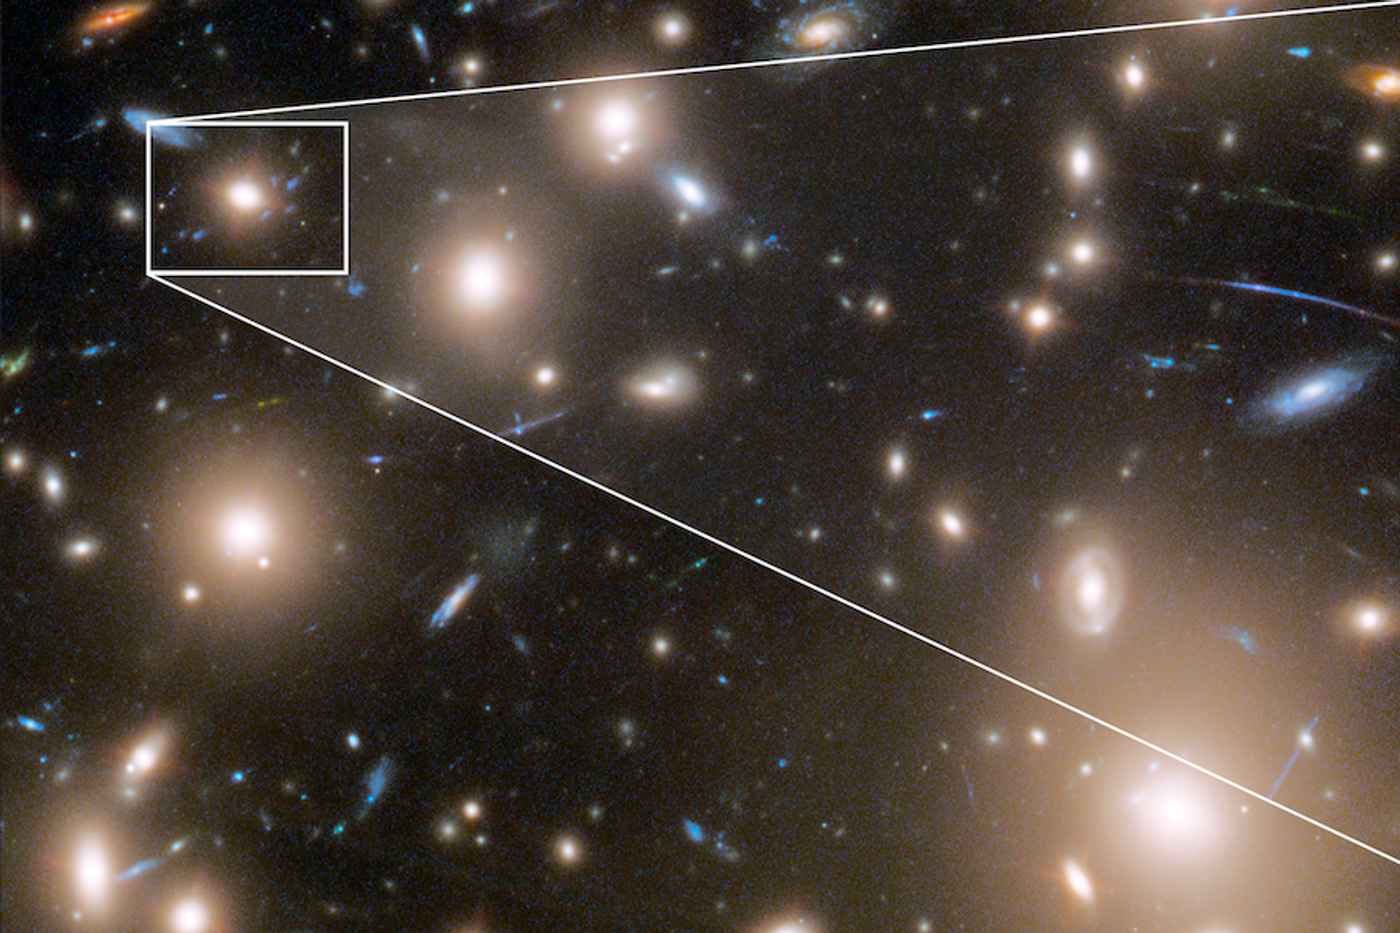 NASA image showing a supernova's light from behind galaxy cluster Abell 370. (Credit: NASA/Wenlei Chen)